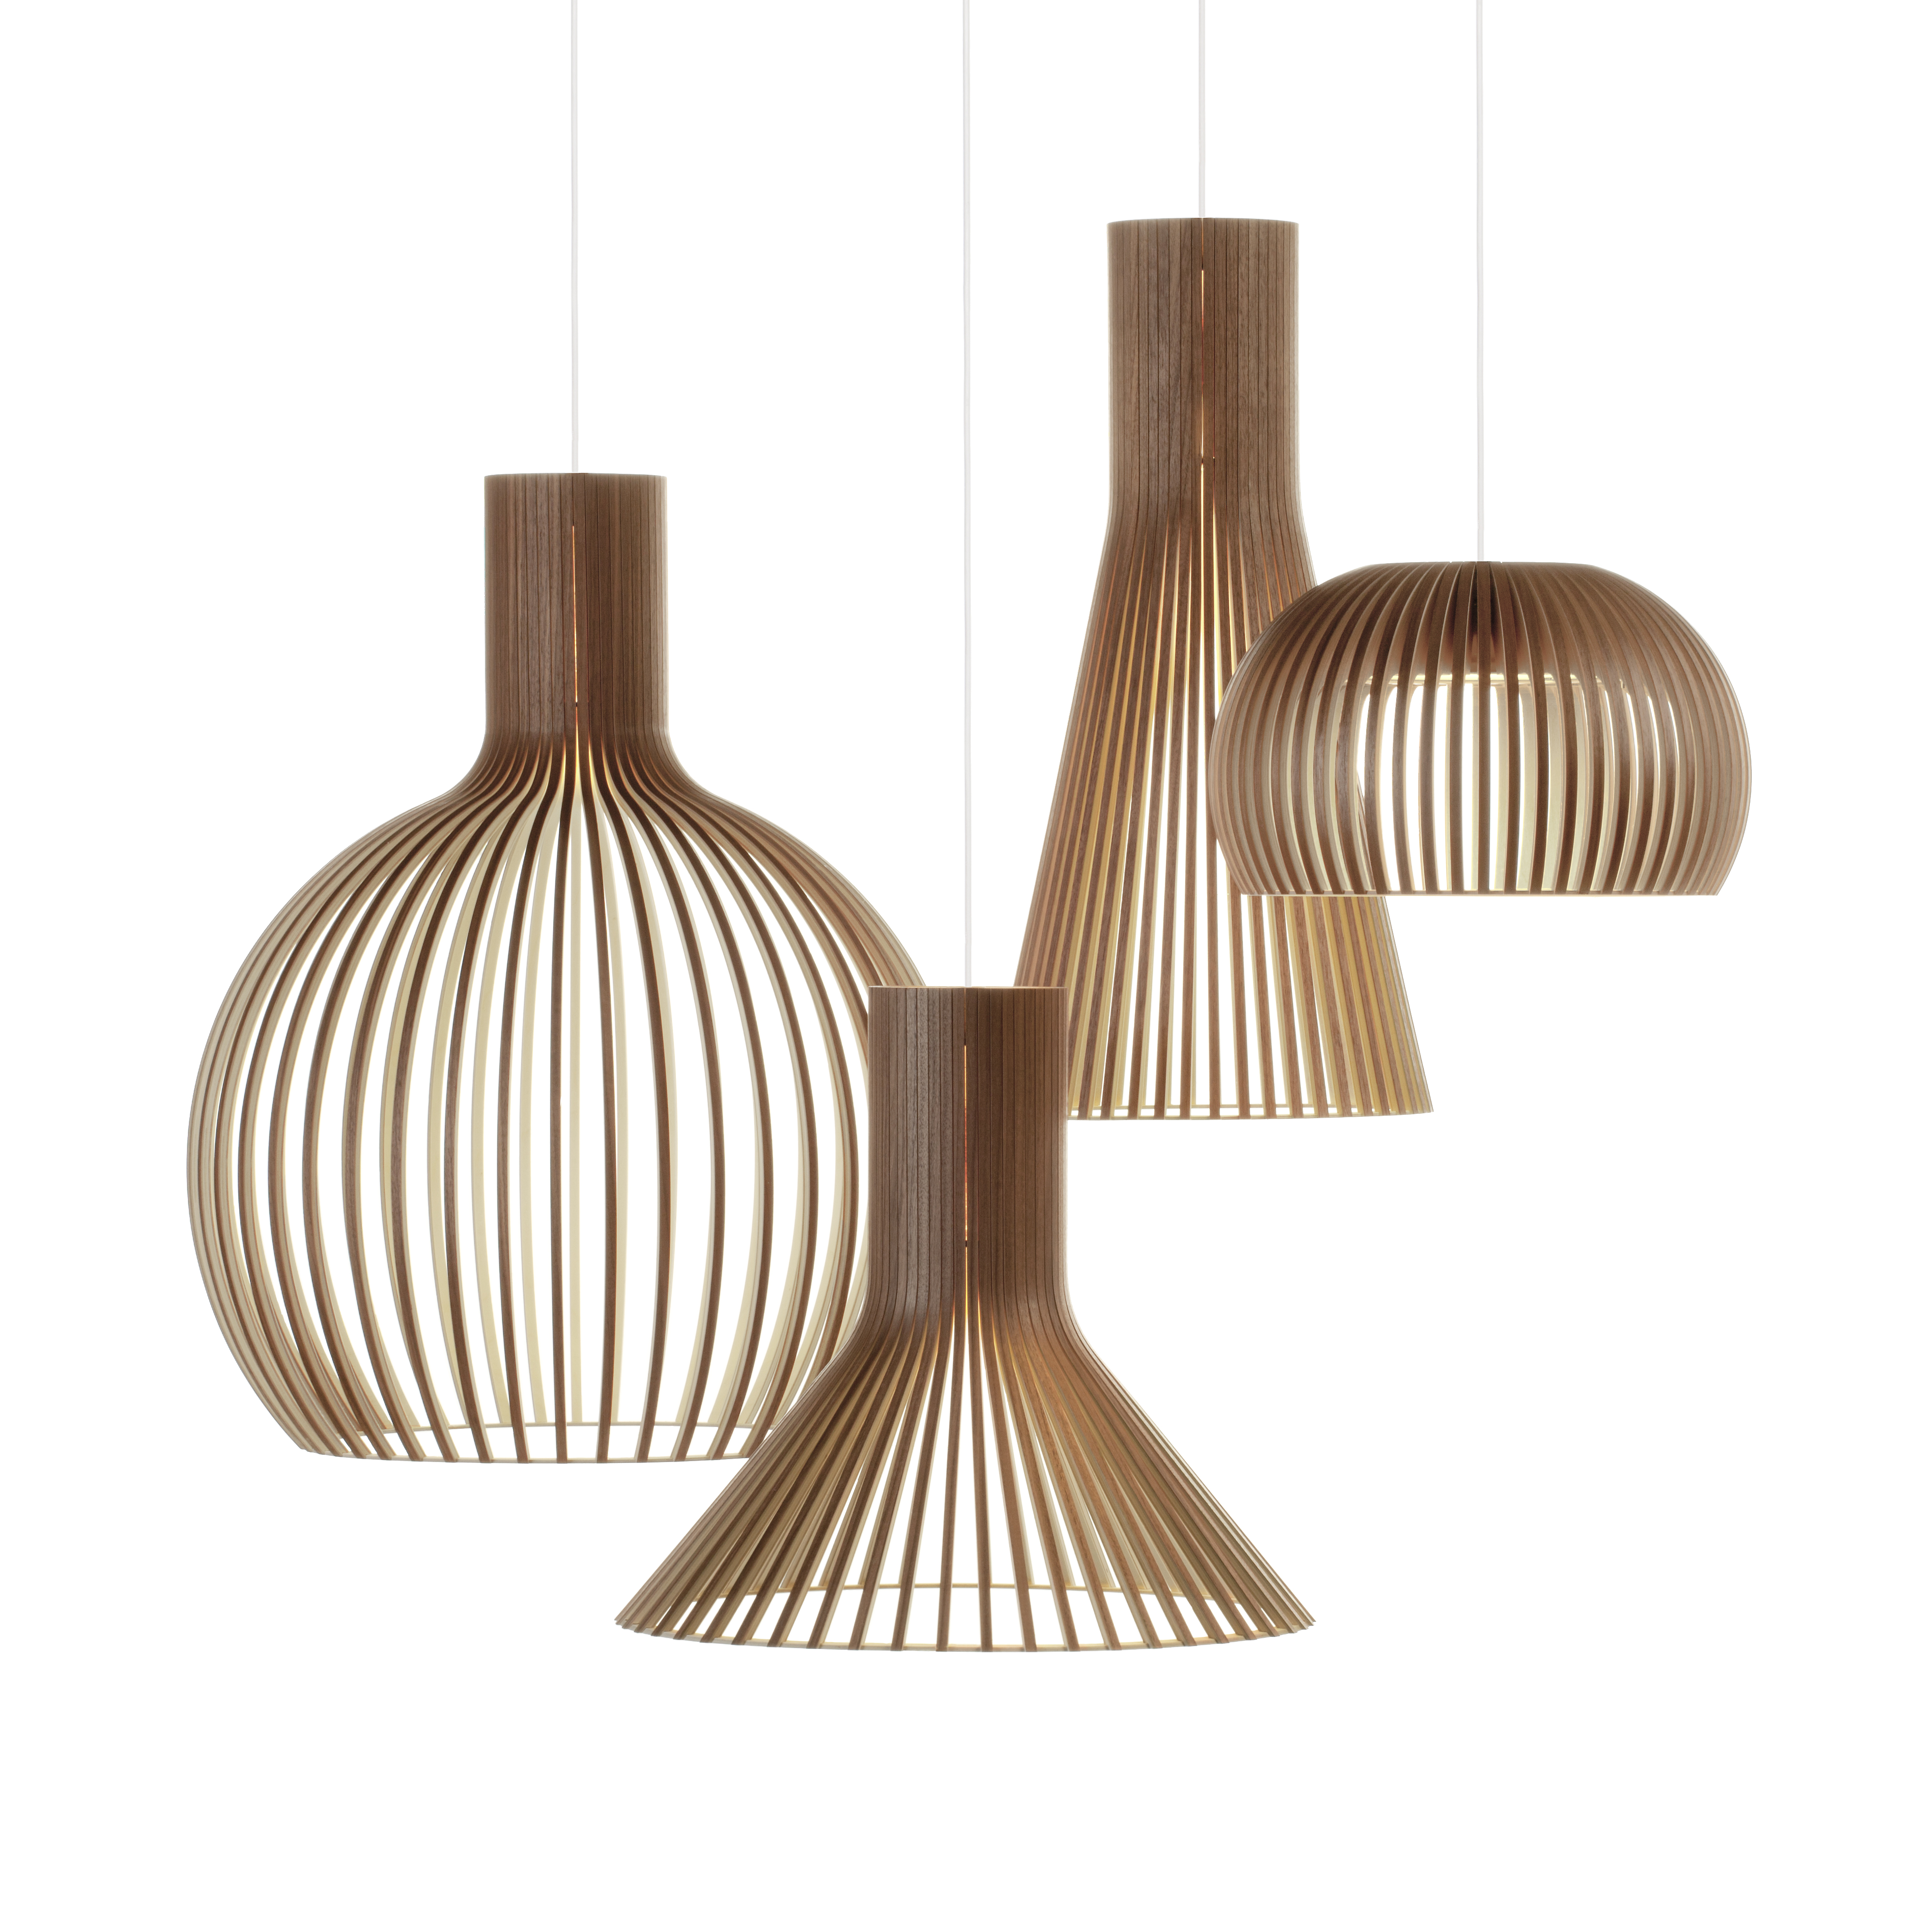 A group of walnut veneered Octo, Puncto, Secto and Atto pendant lamps.